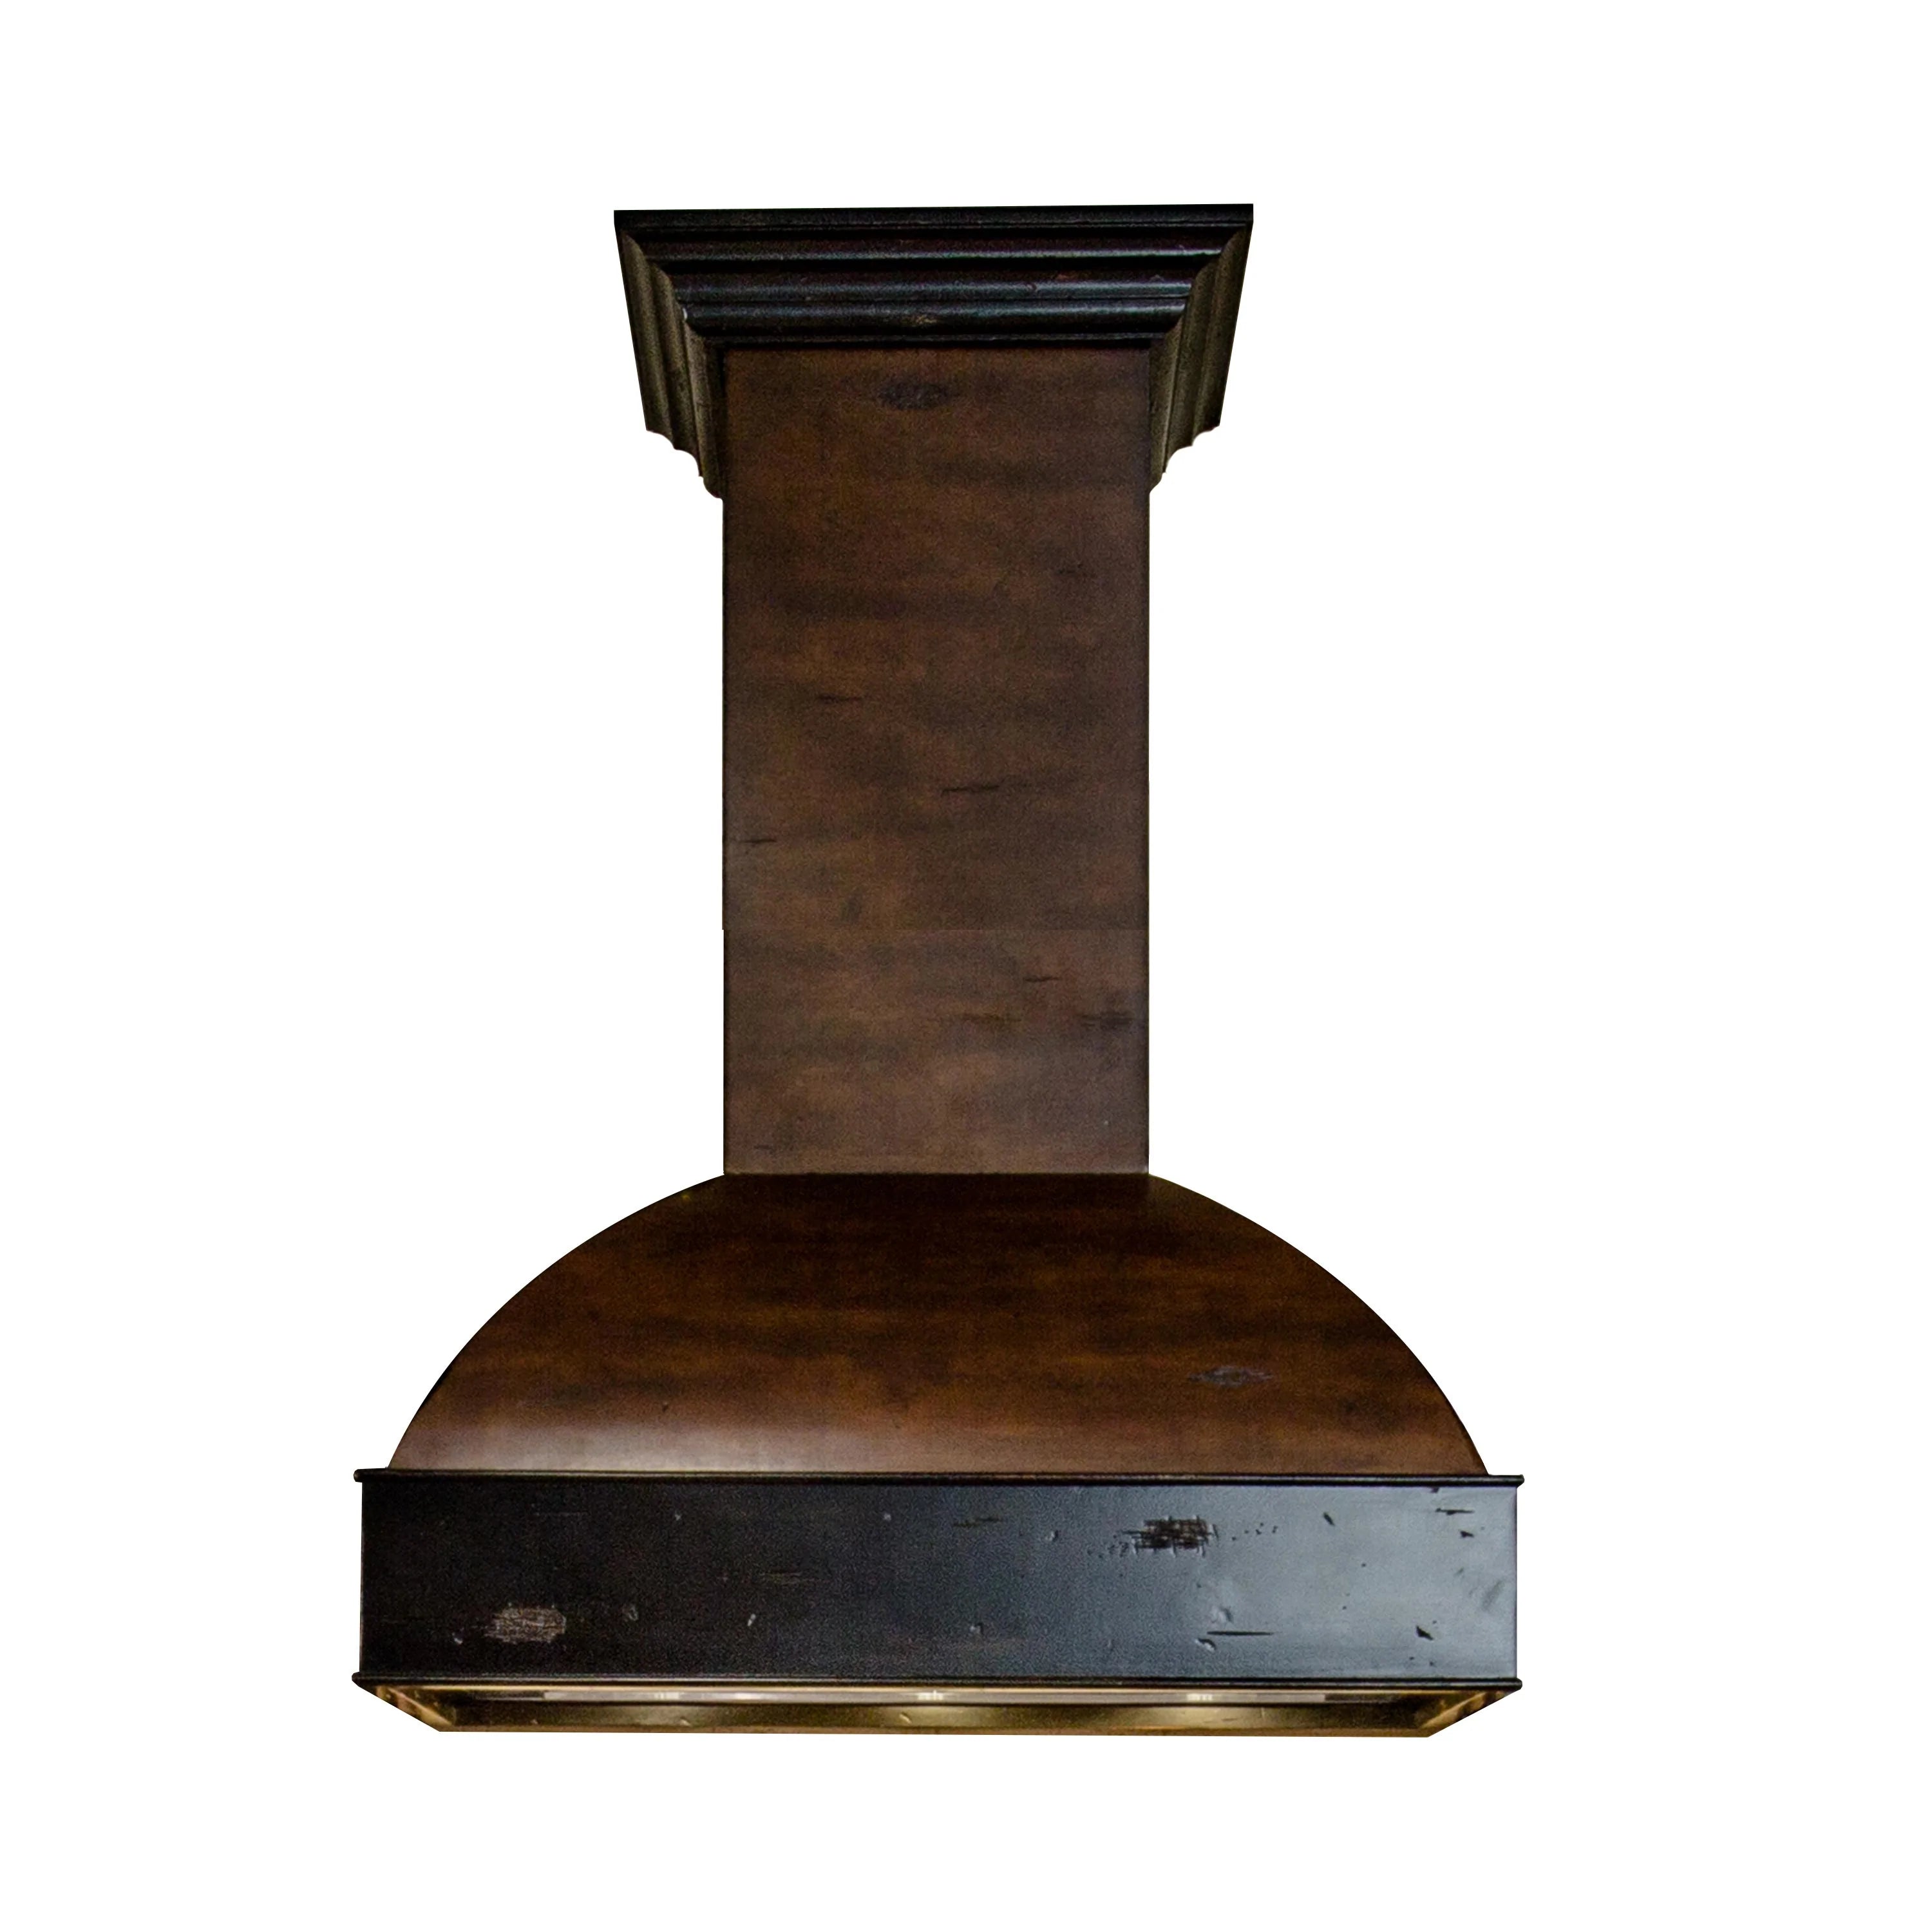 ZLINE 36" Wooden Wall Mount Range Hood in Antigua and Walnut - Includes Remote Motor